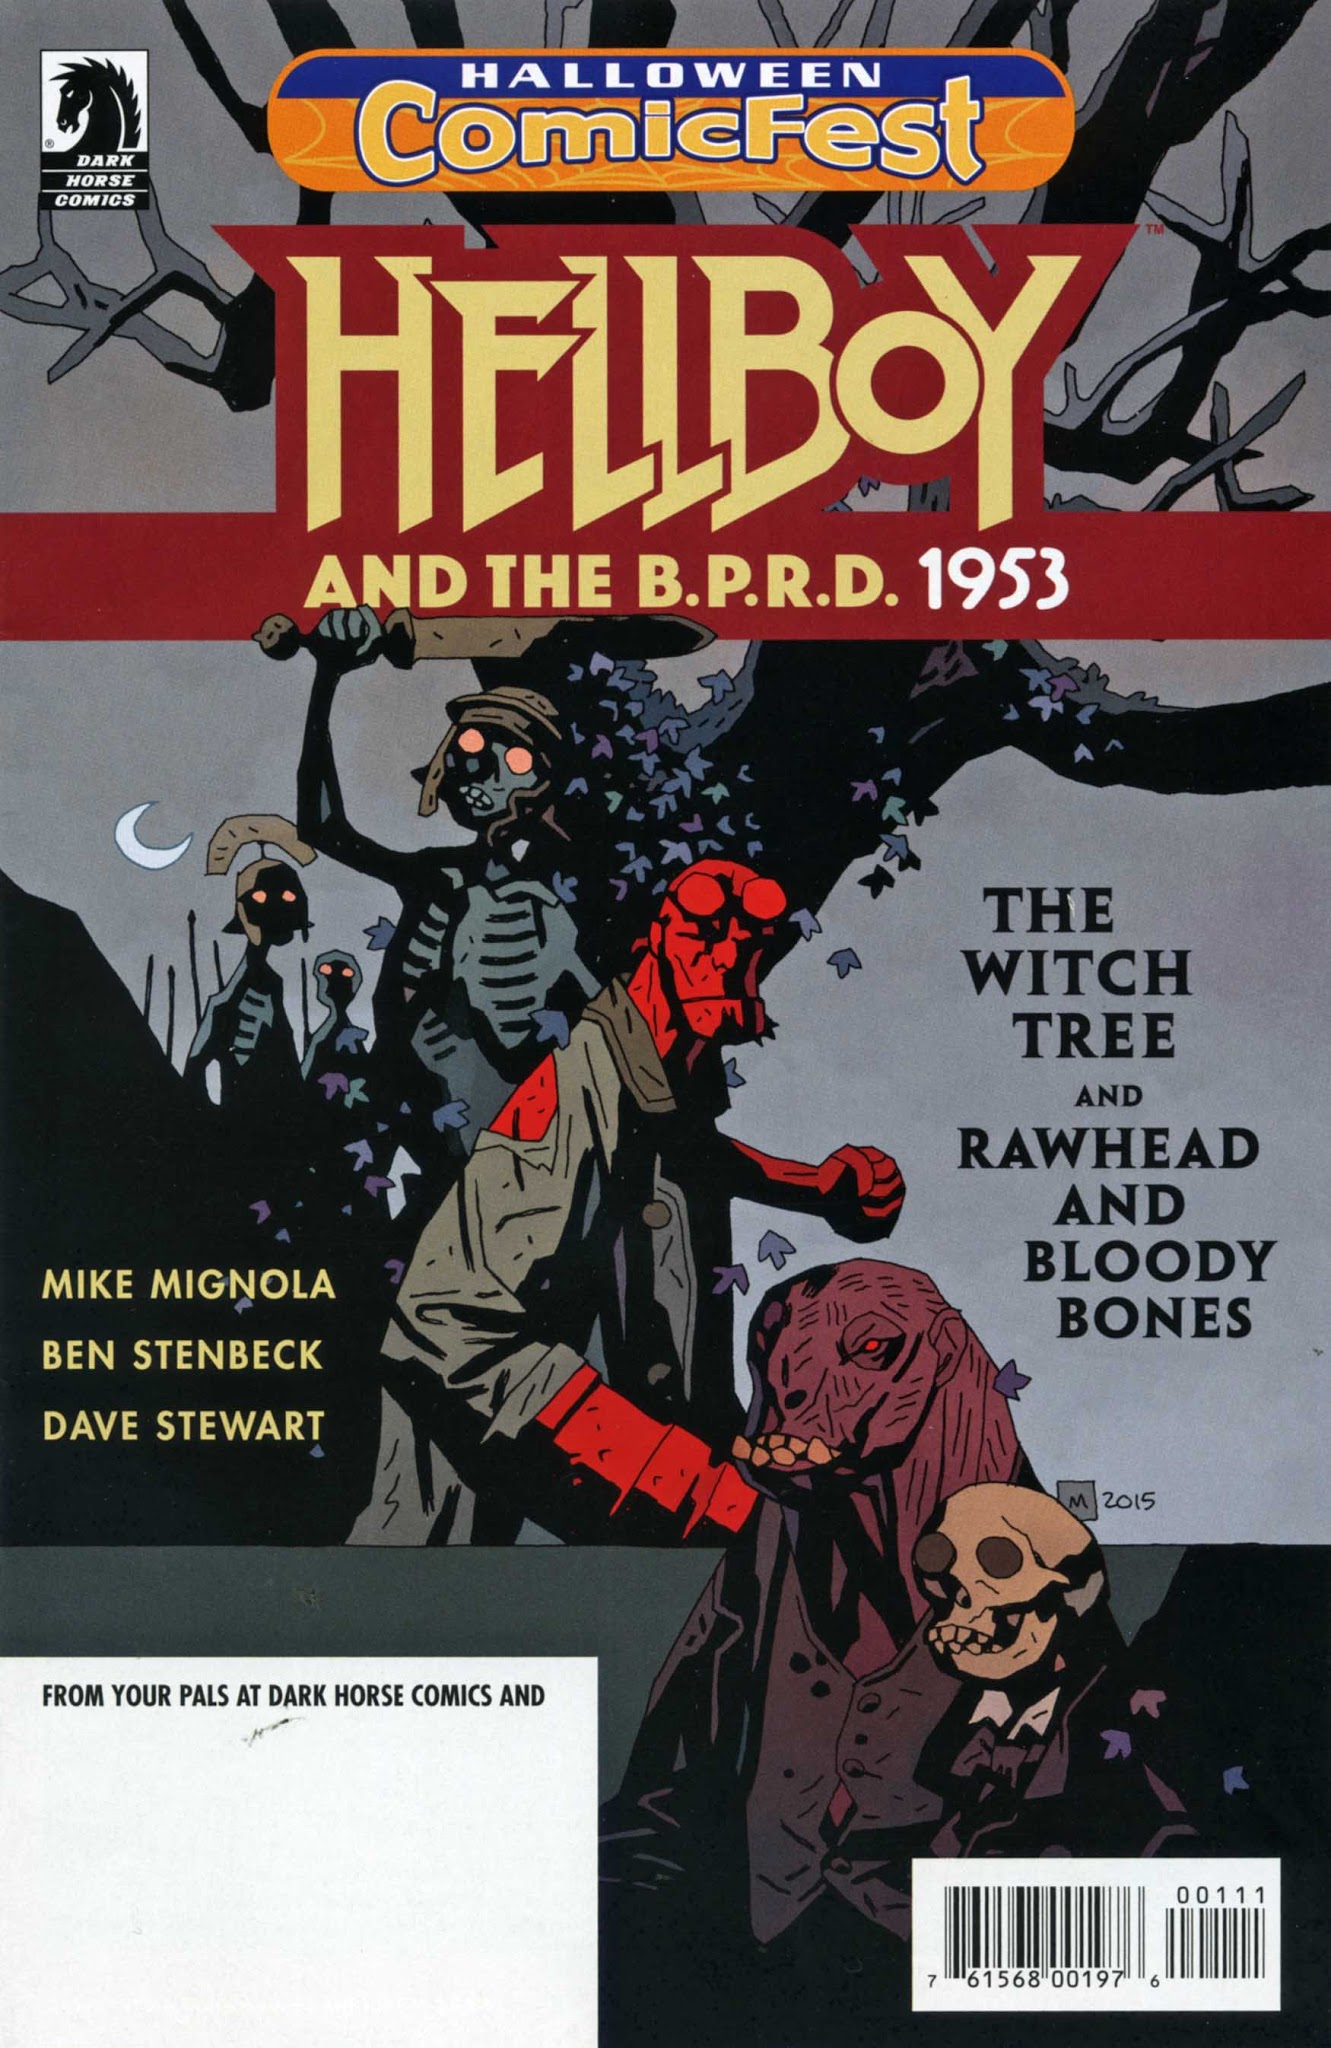 Read online Hellboy and the B.P.R.D. 1953: Halloween ComicFest comic -  Issue # Full - 1